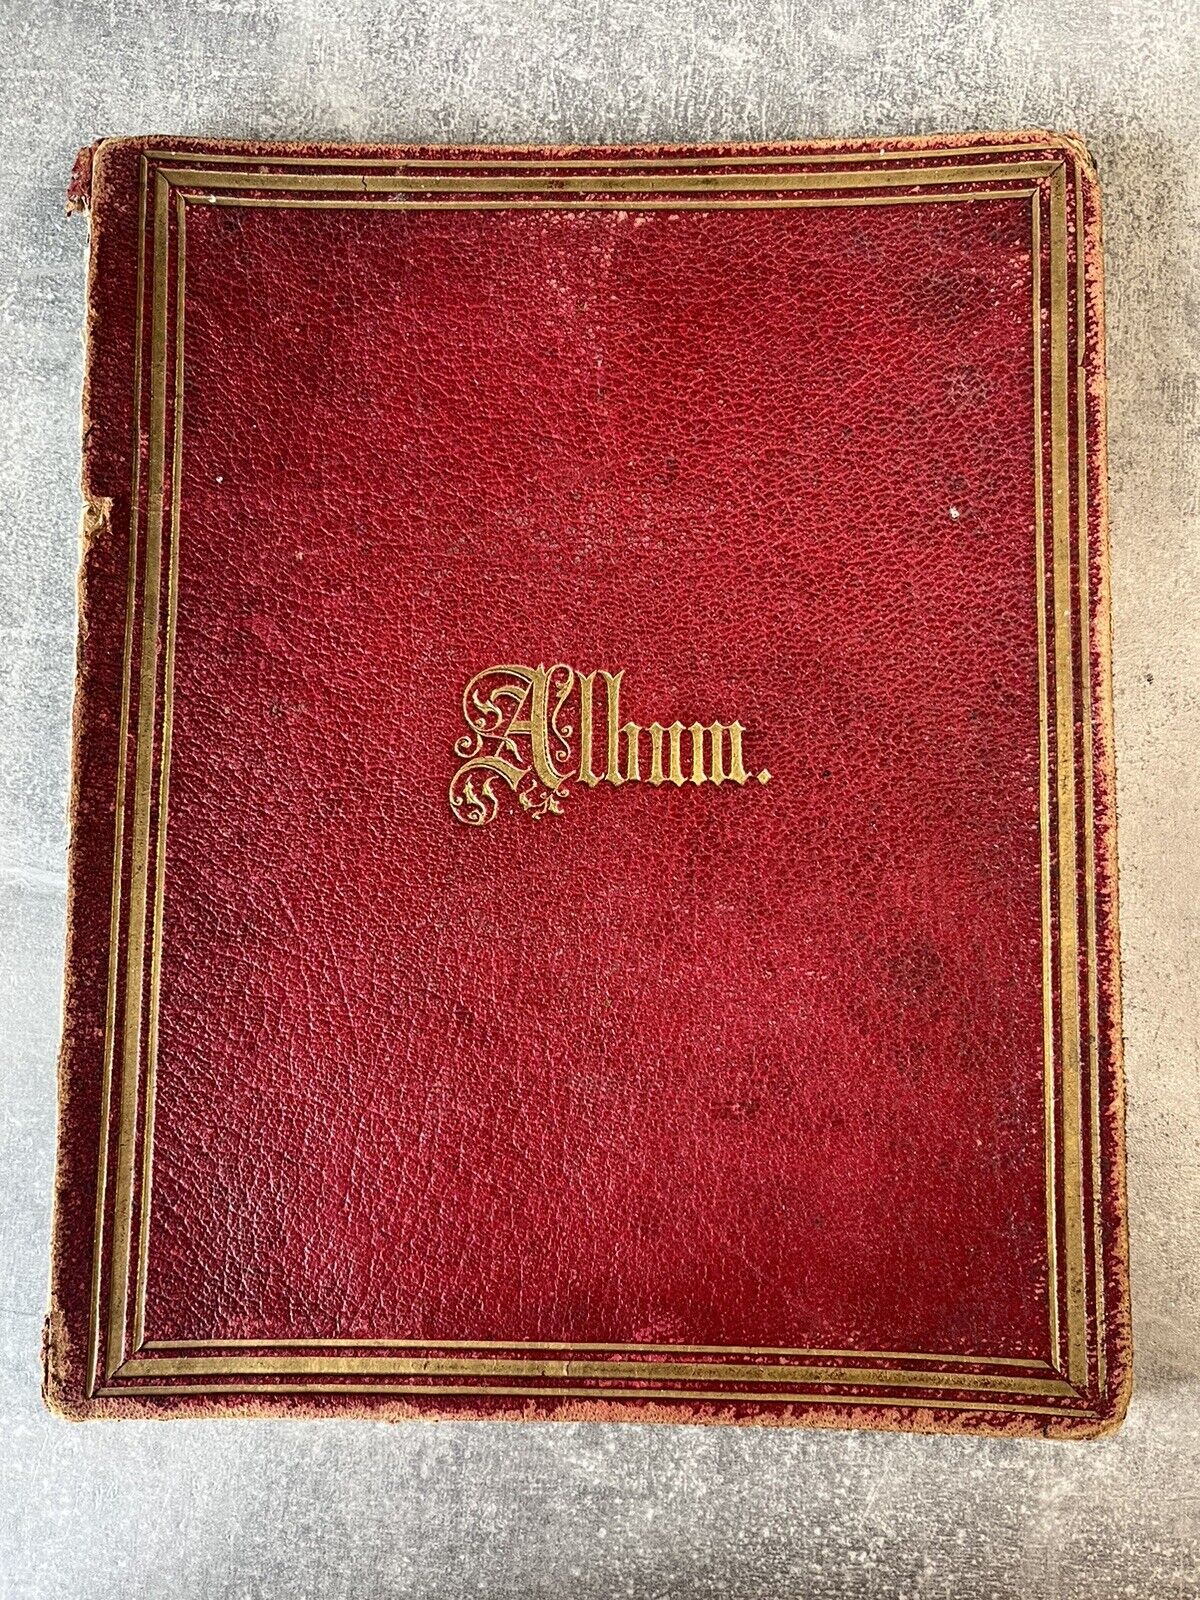 Manuscript Handwritten Poetry - 1874 to 1877 - Red Leather Book with Gold Gilt